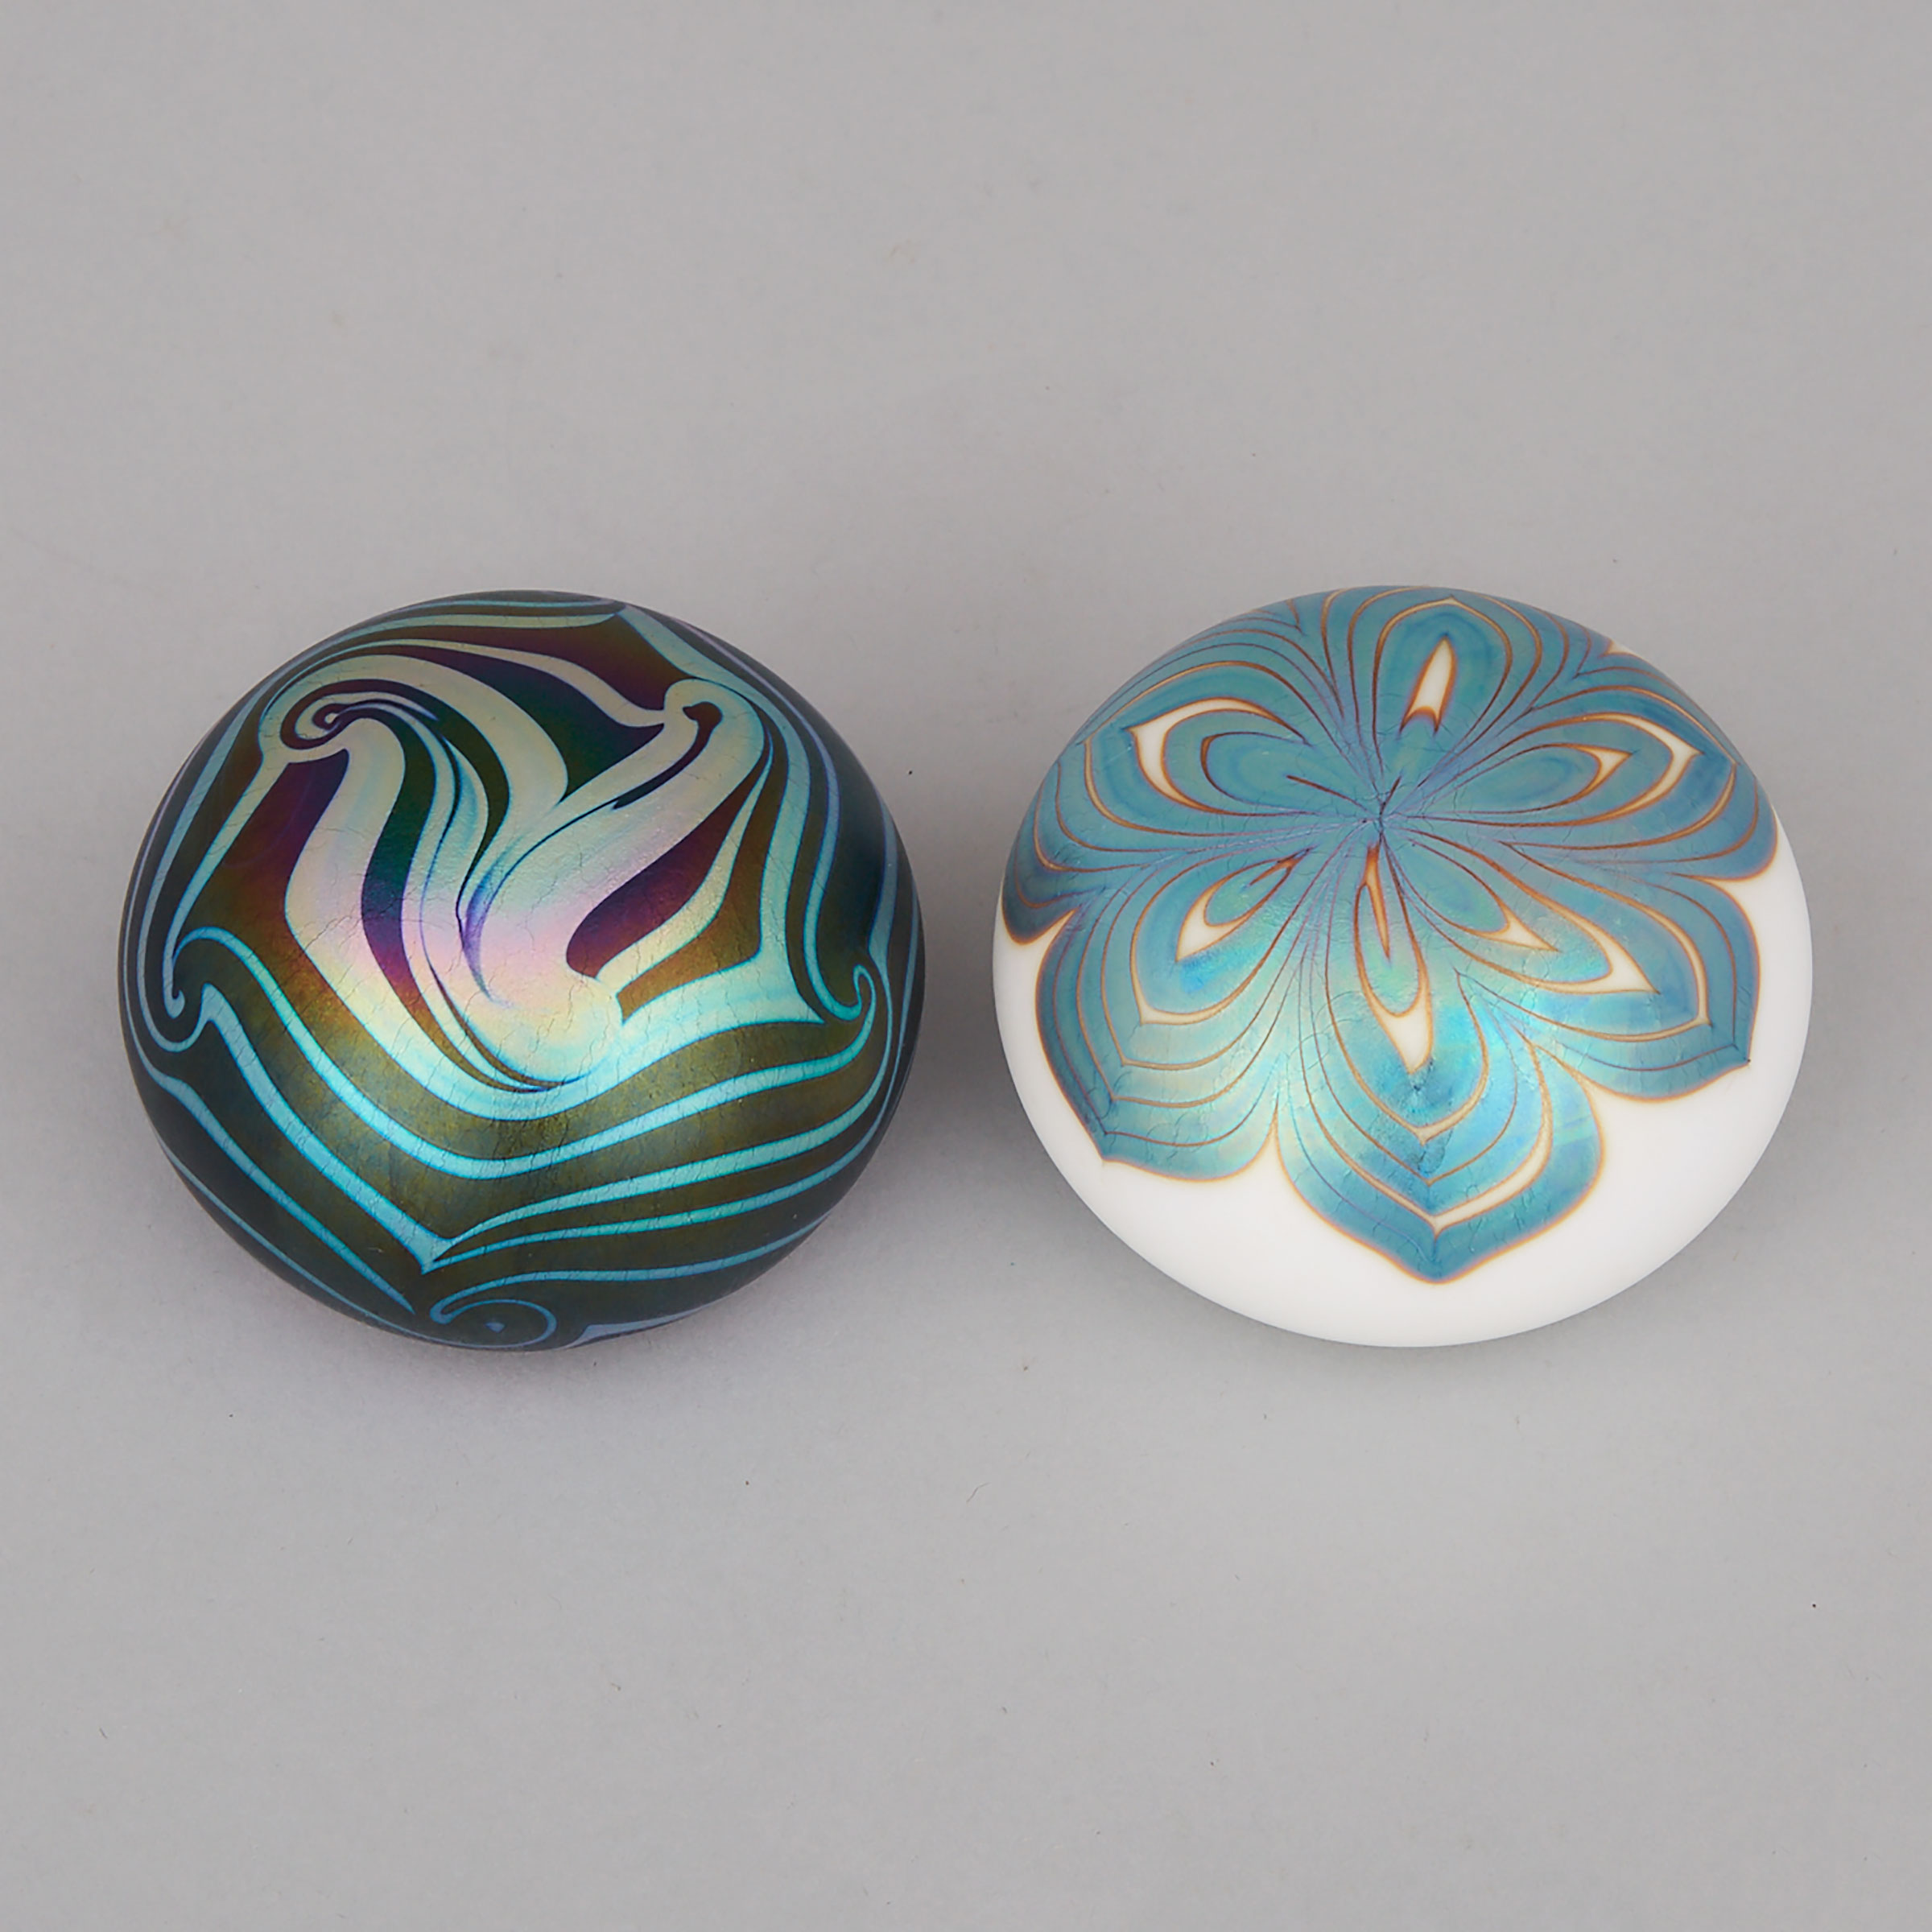 Two Charles Lotton Iridescent Glass Paperweights, 1973